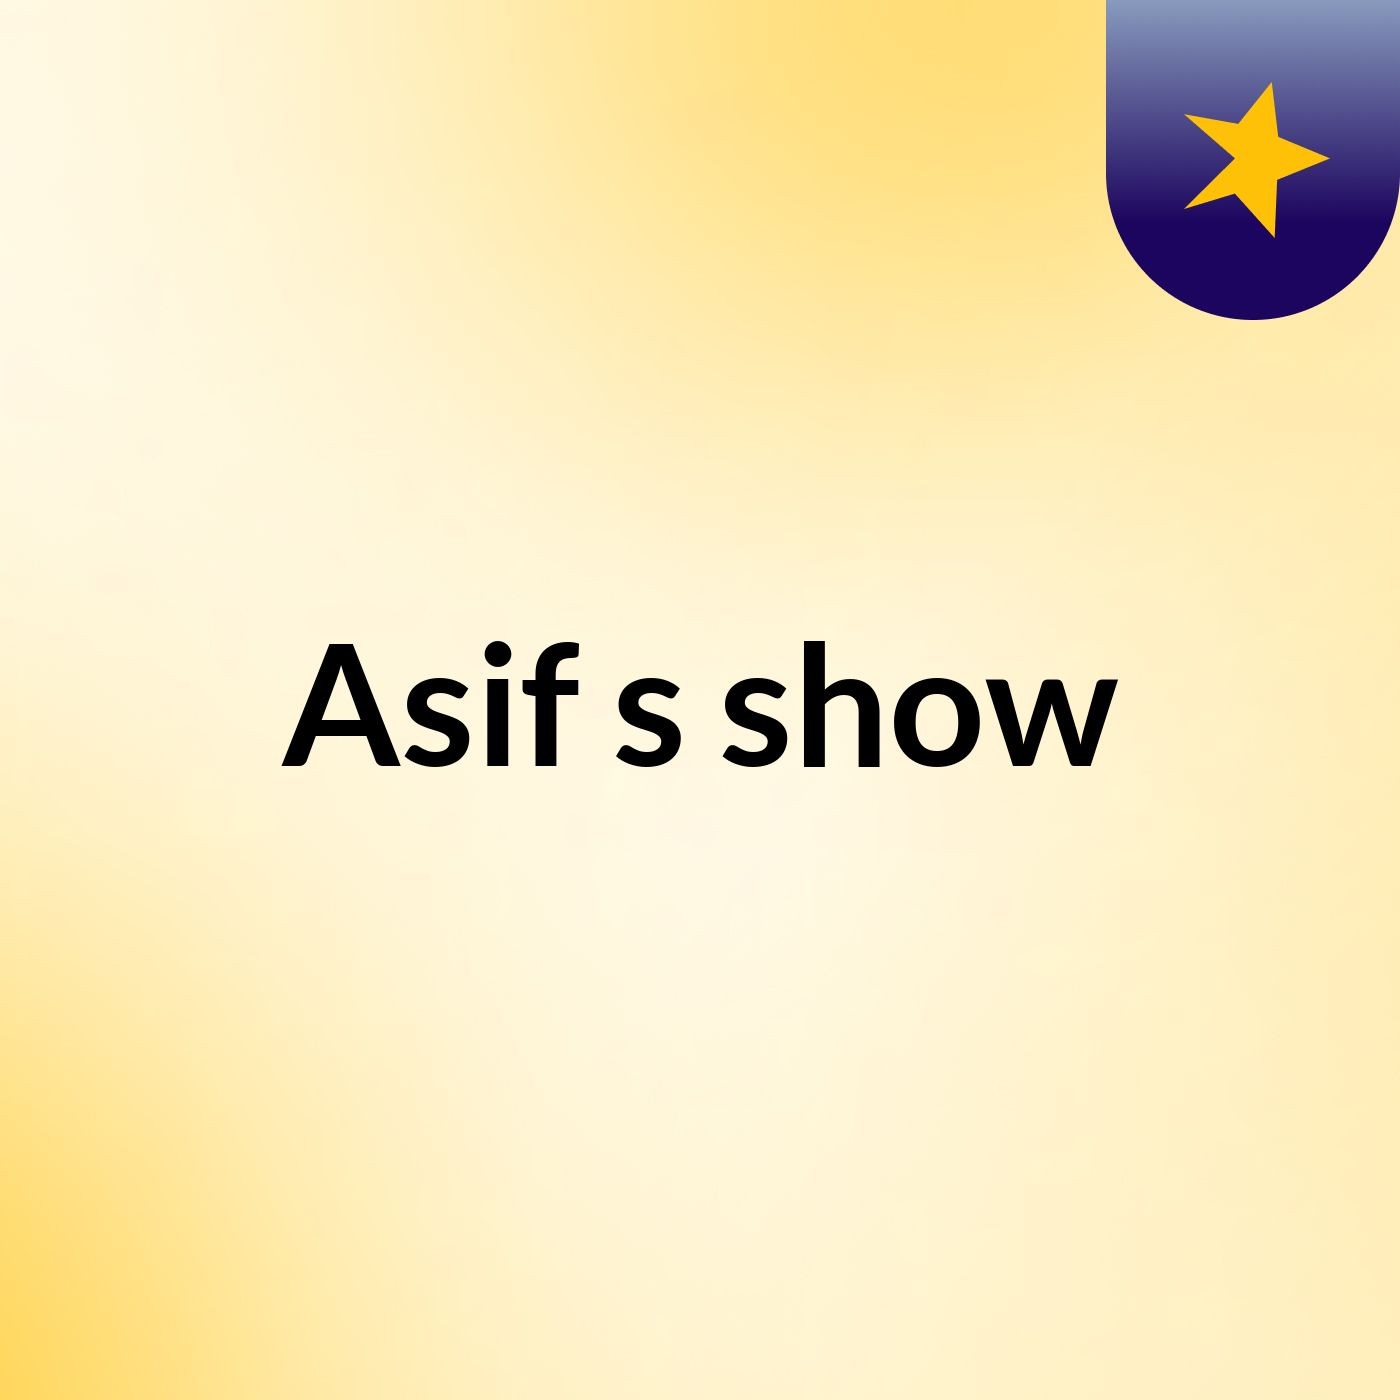 Asif's show